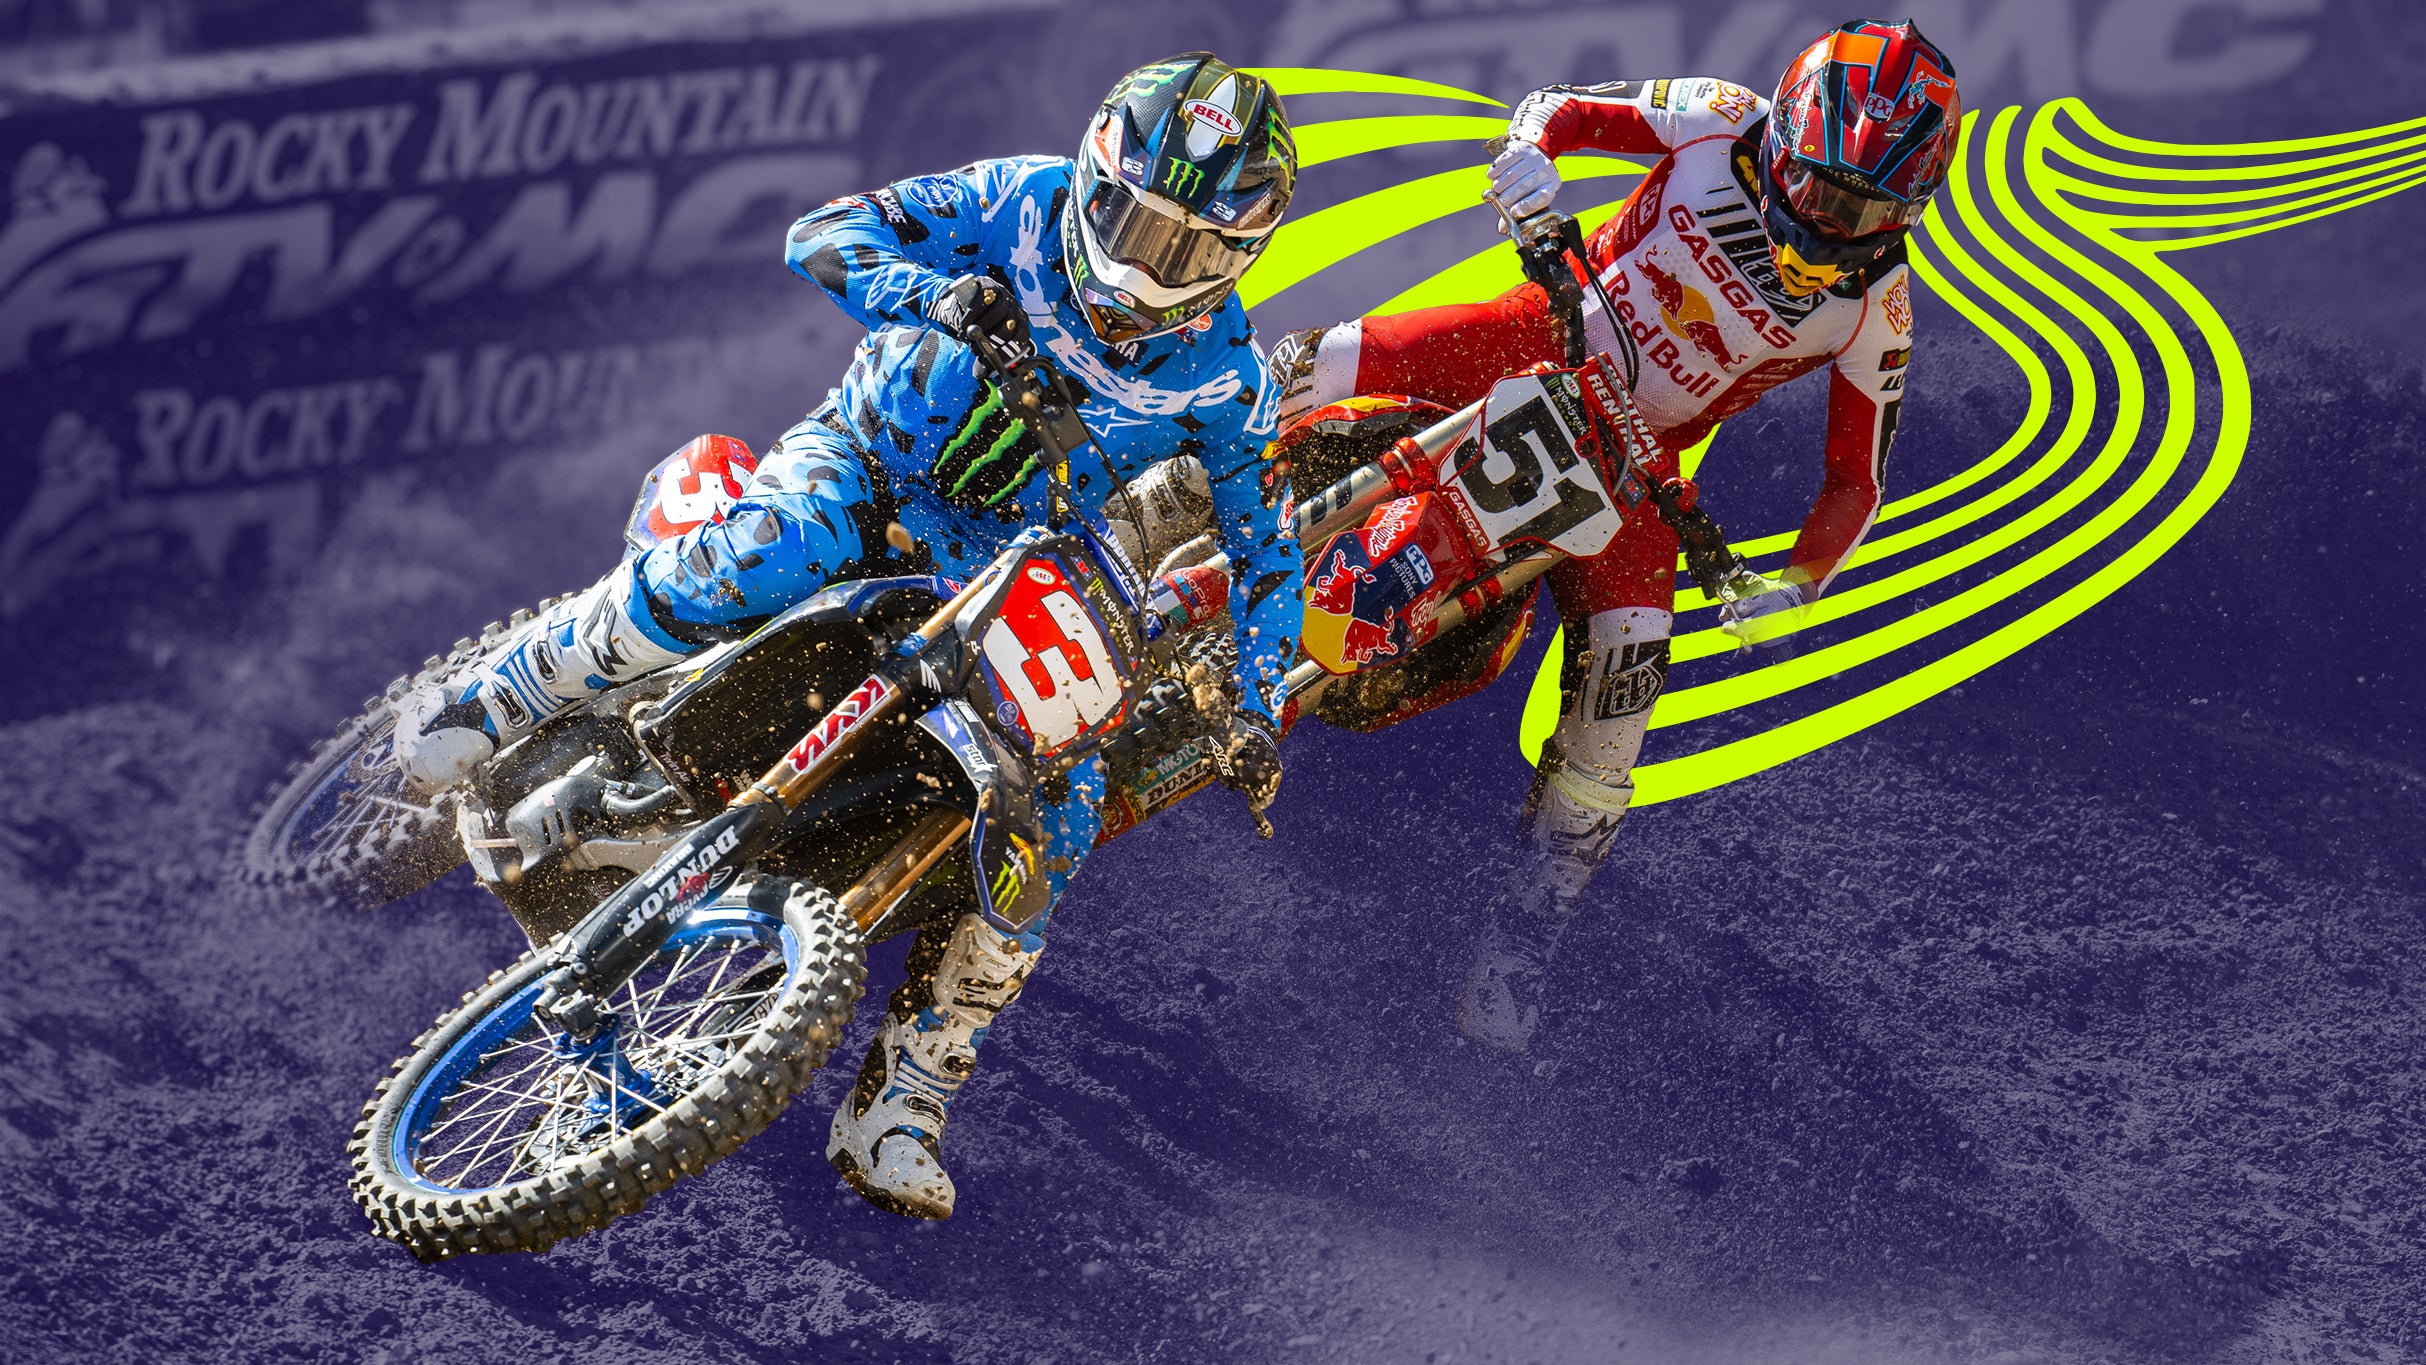 SuperMotocross World Championship Finals presale passcode for show tickets in Concord, NC (zMAX Dragway)